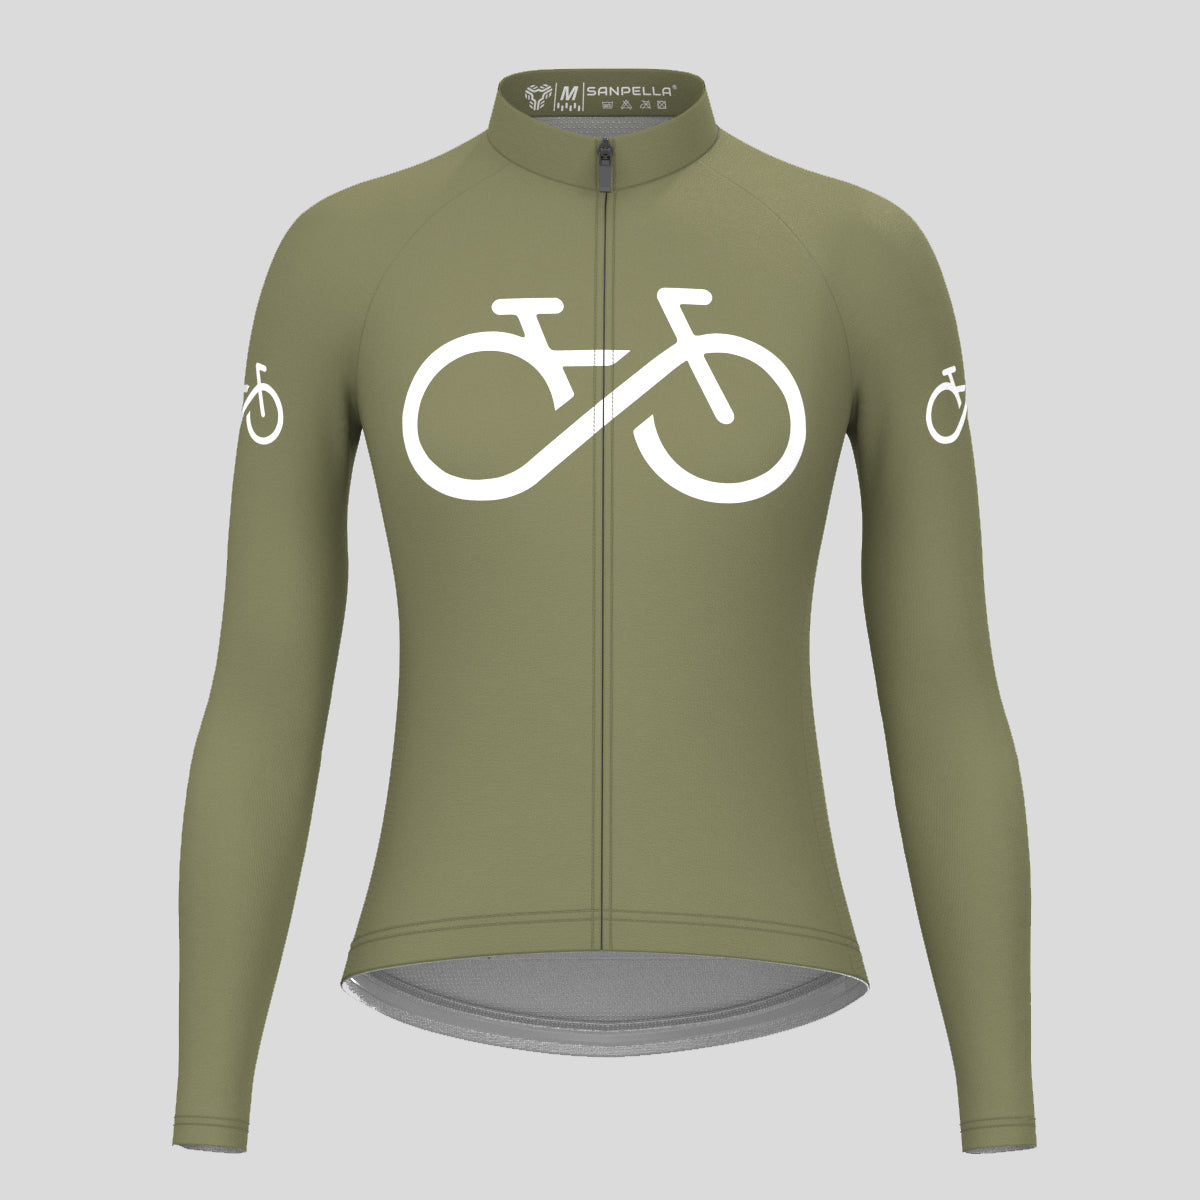 Bike Forever Women's LS Cycling Jersey - Olive